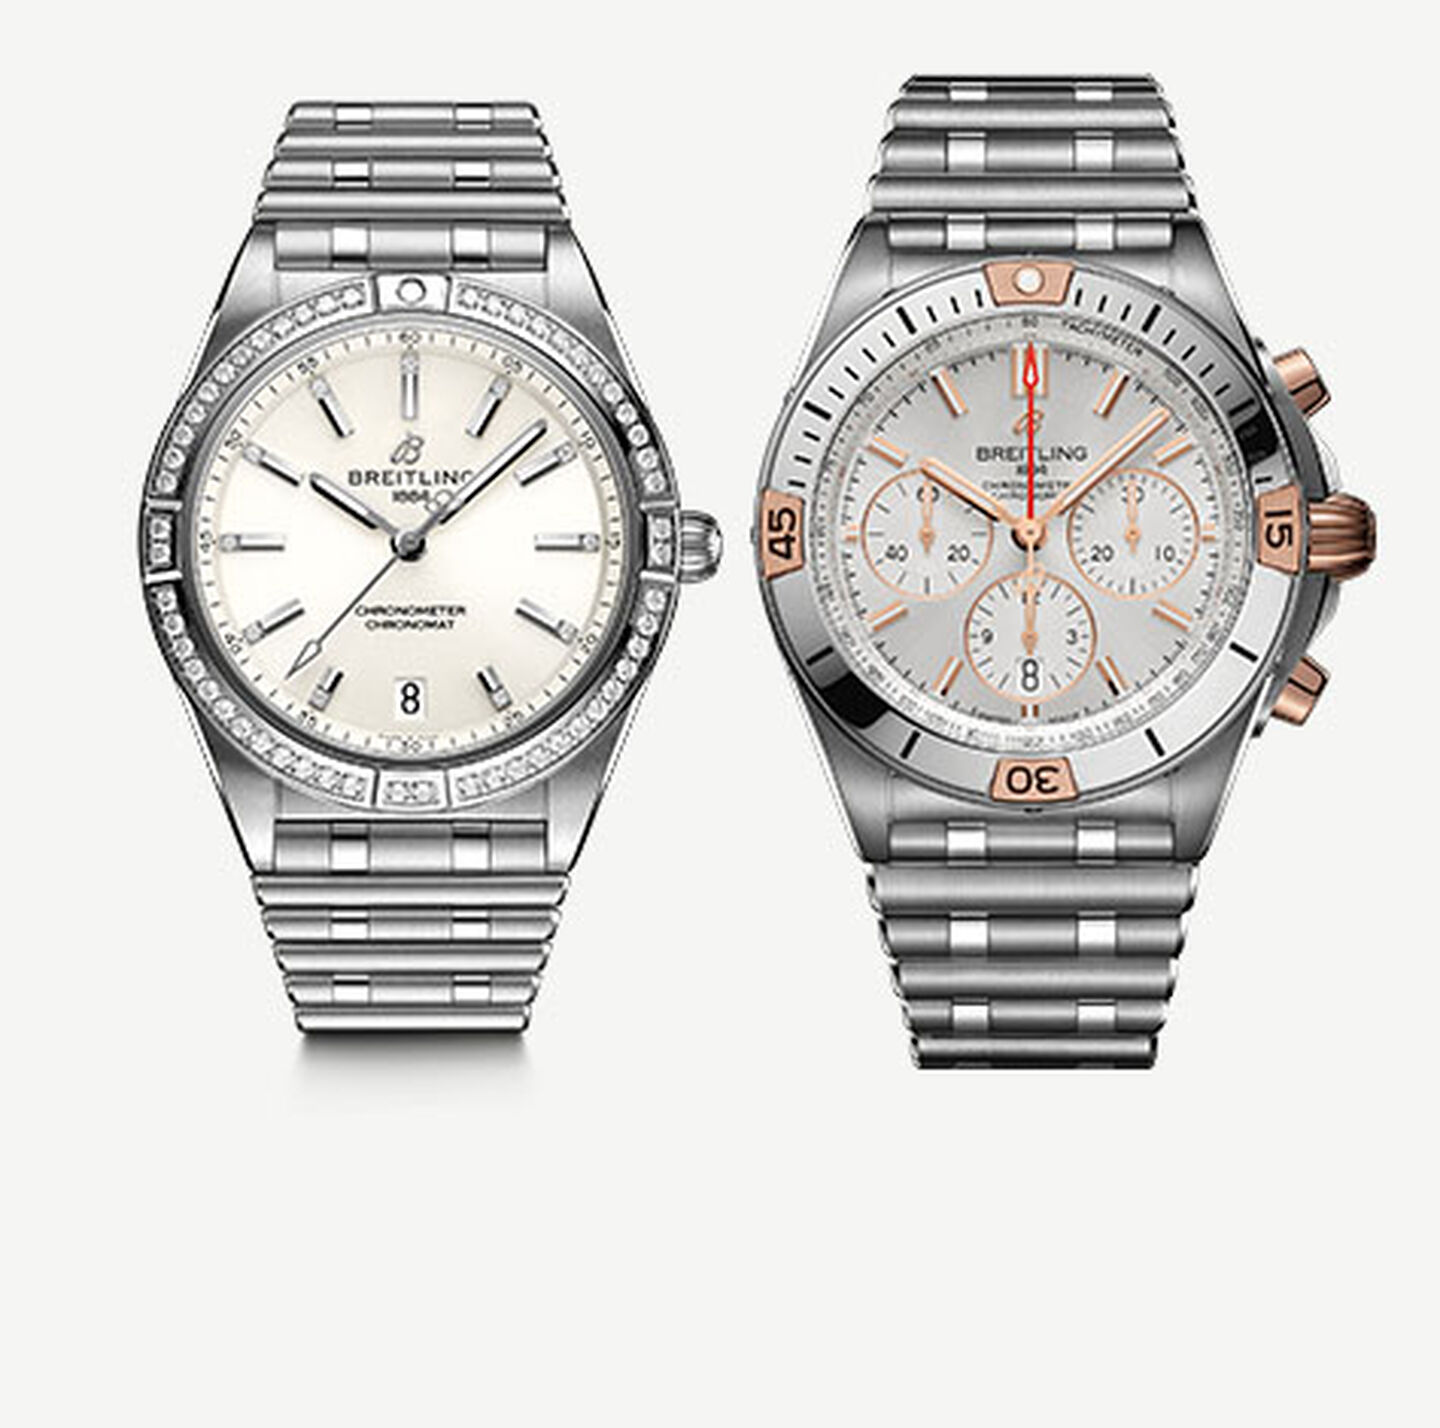 Breitling watches for her and him